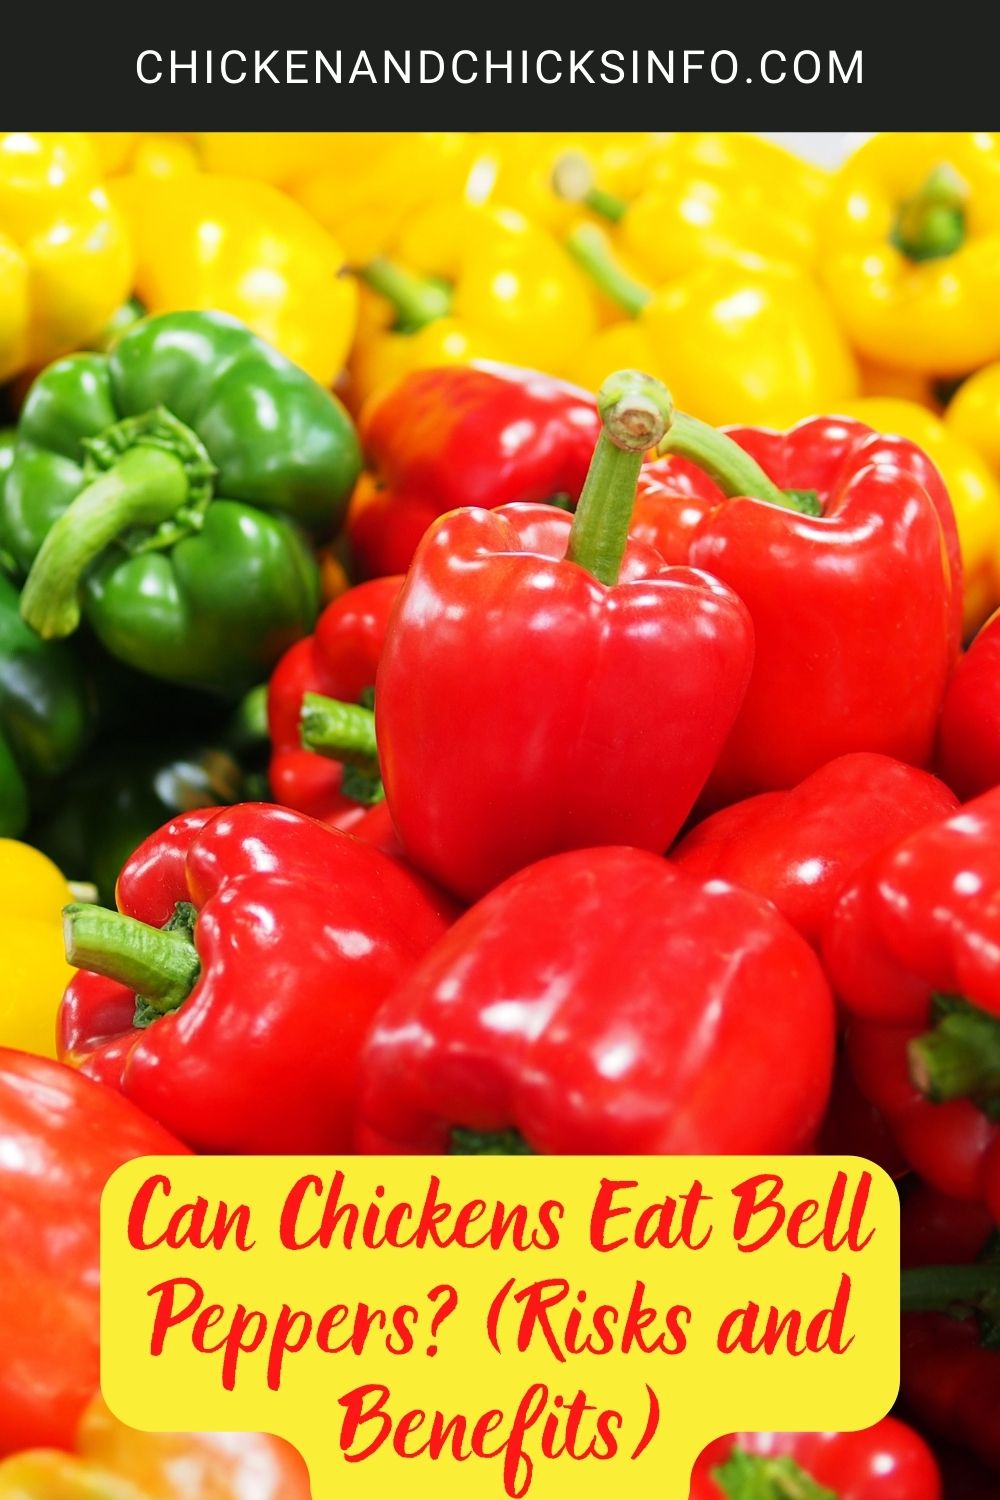 Can Chickens Eat Bell Peppers? (Risks and Benefits) poster.
